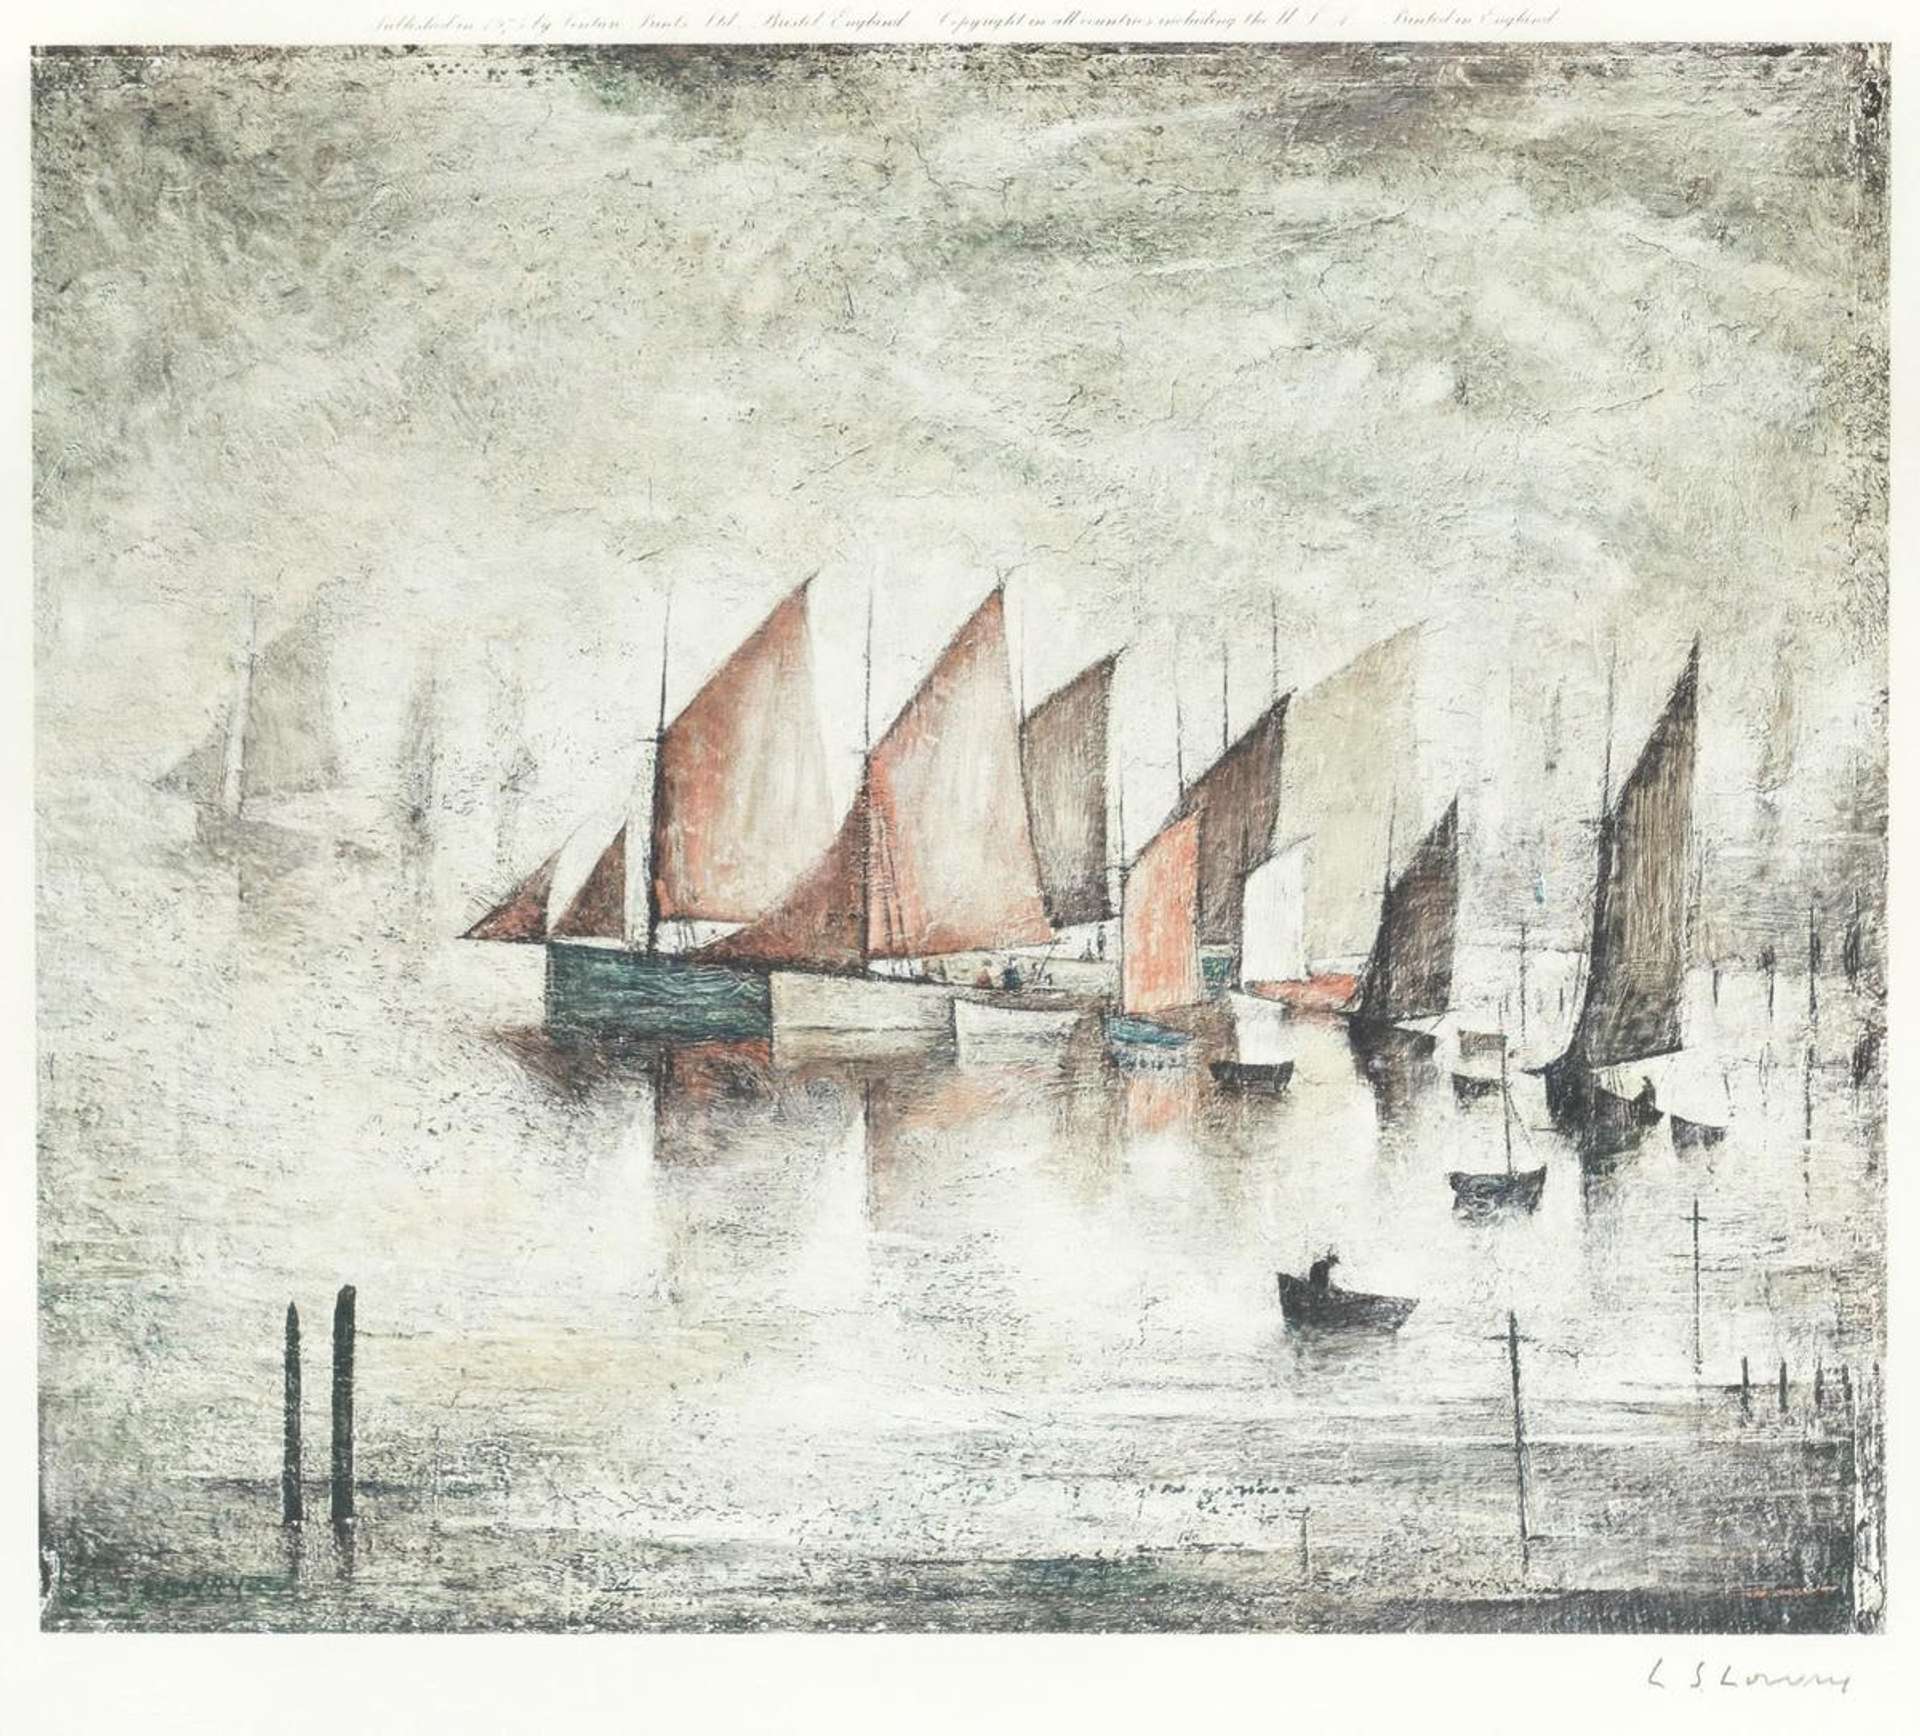 L.S. Lowry’s Sailing Boats. A lithograph of multiple sail boats out on the water. 